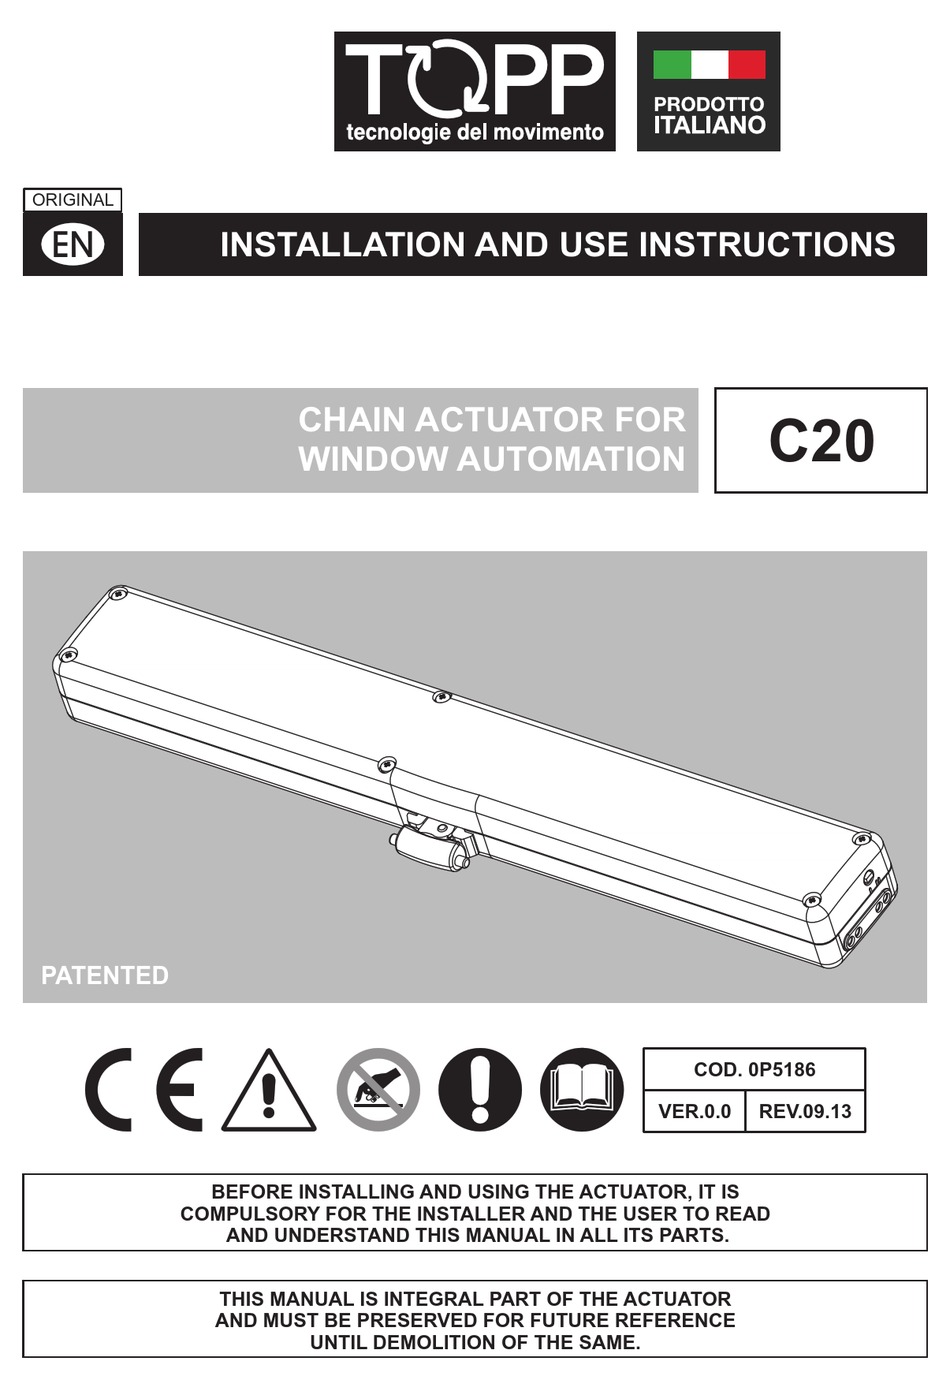 Actuator A Chain For Window Doors And A Shoot Through Topp C20 230V 